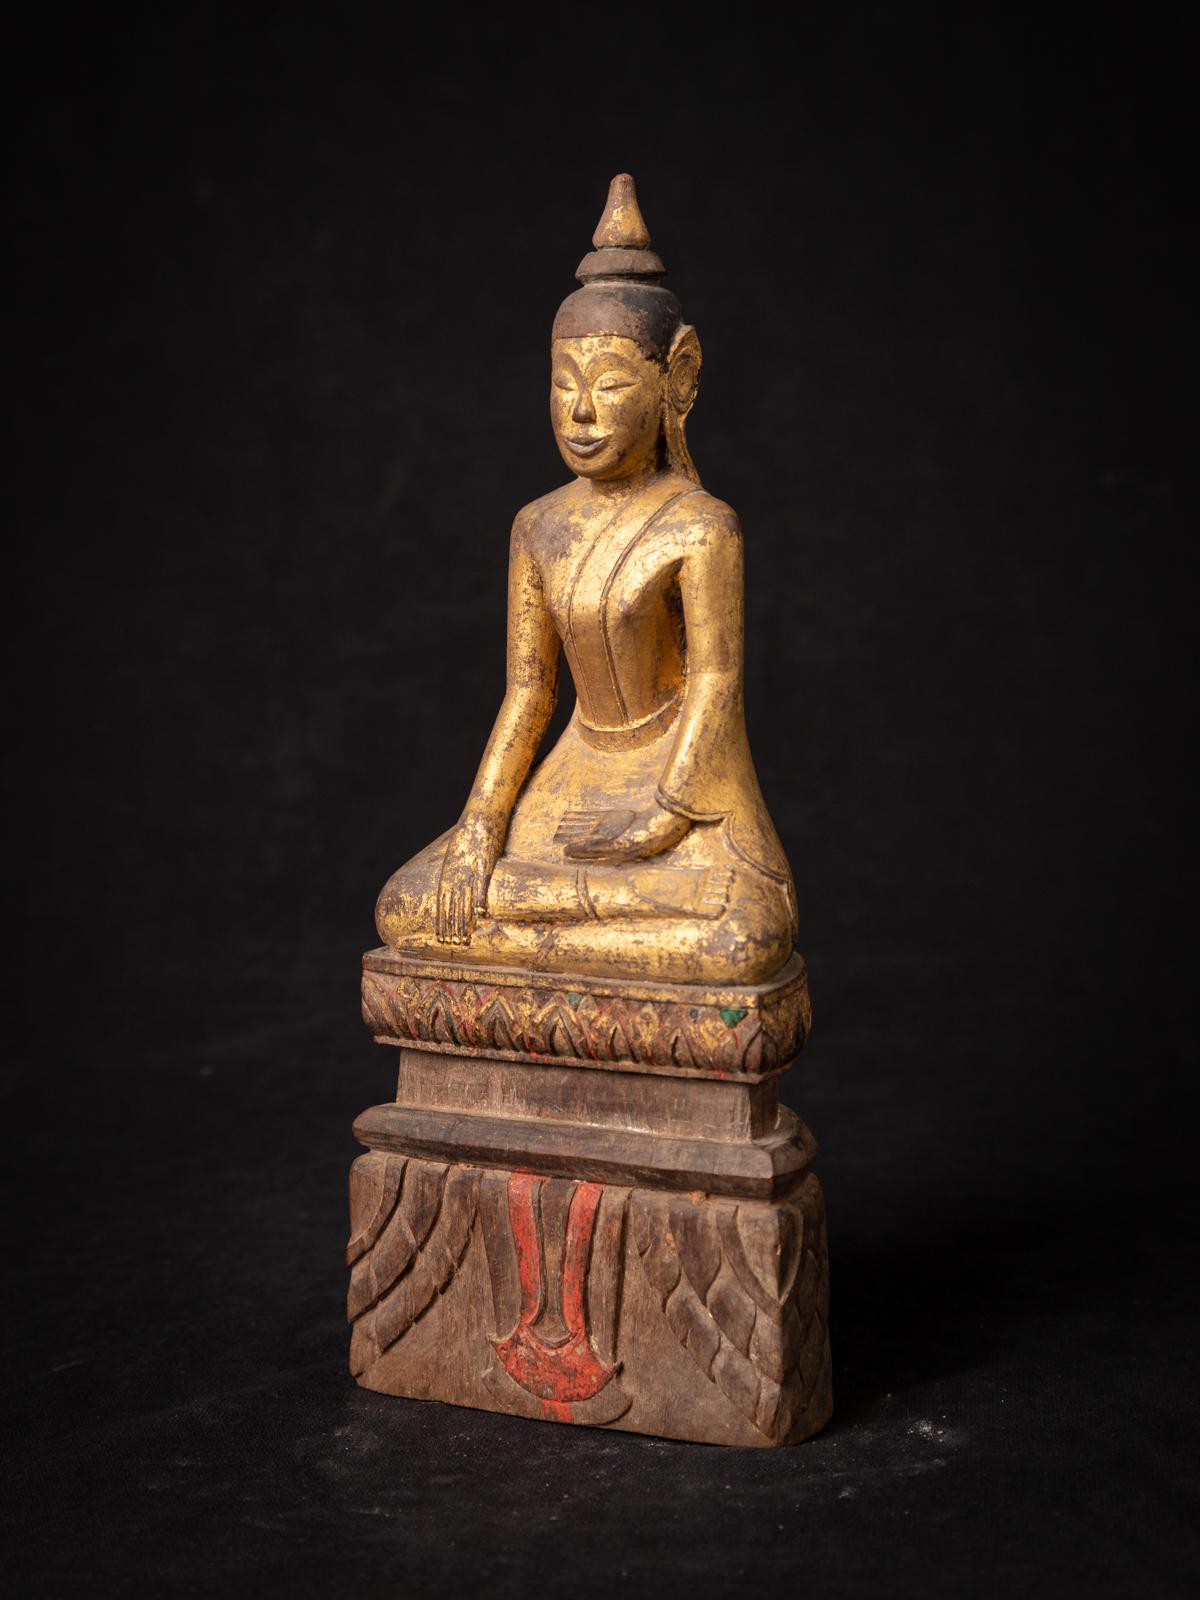 Discover the allure of an antique wooden Thai Buddha statue, a treasure steeped in history and spirituality. Carved from wood, this exquisite piece stands at 23.5 cm tall, with dimensions of 9.8 cm in width and 5.5 cm in depth. Its intricate details